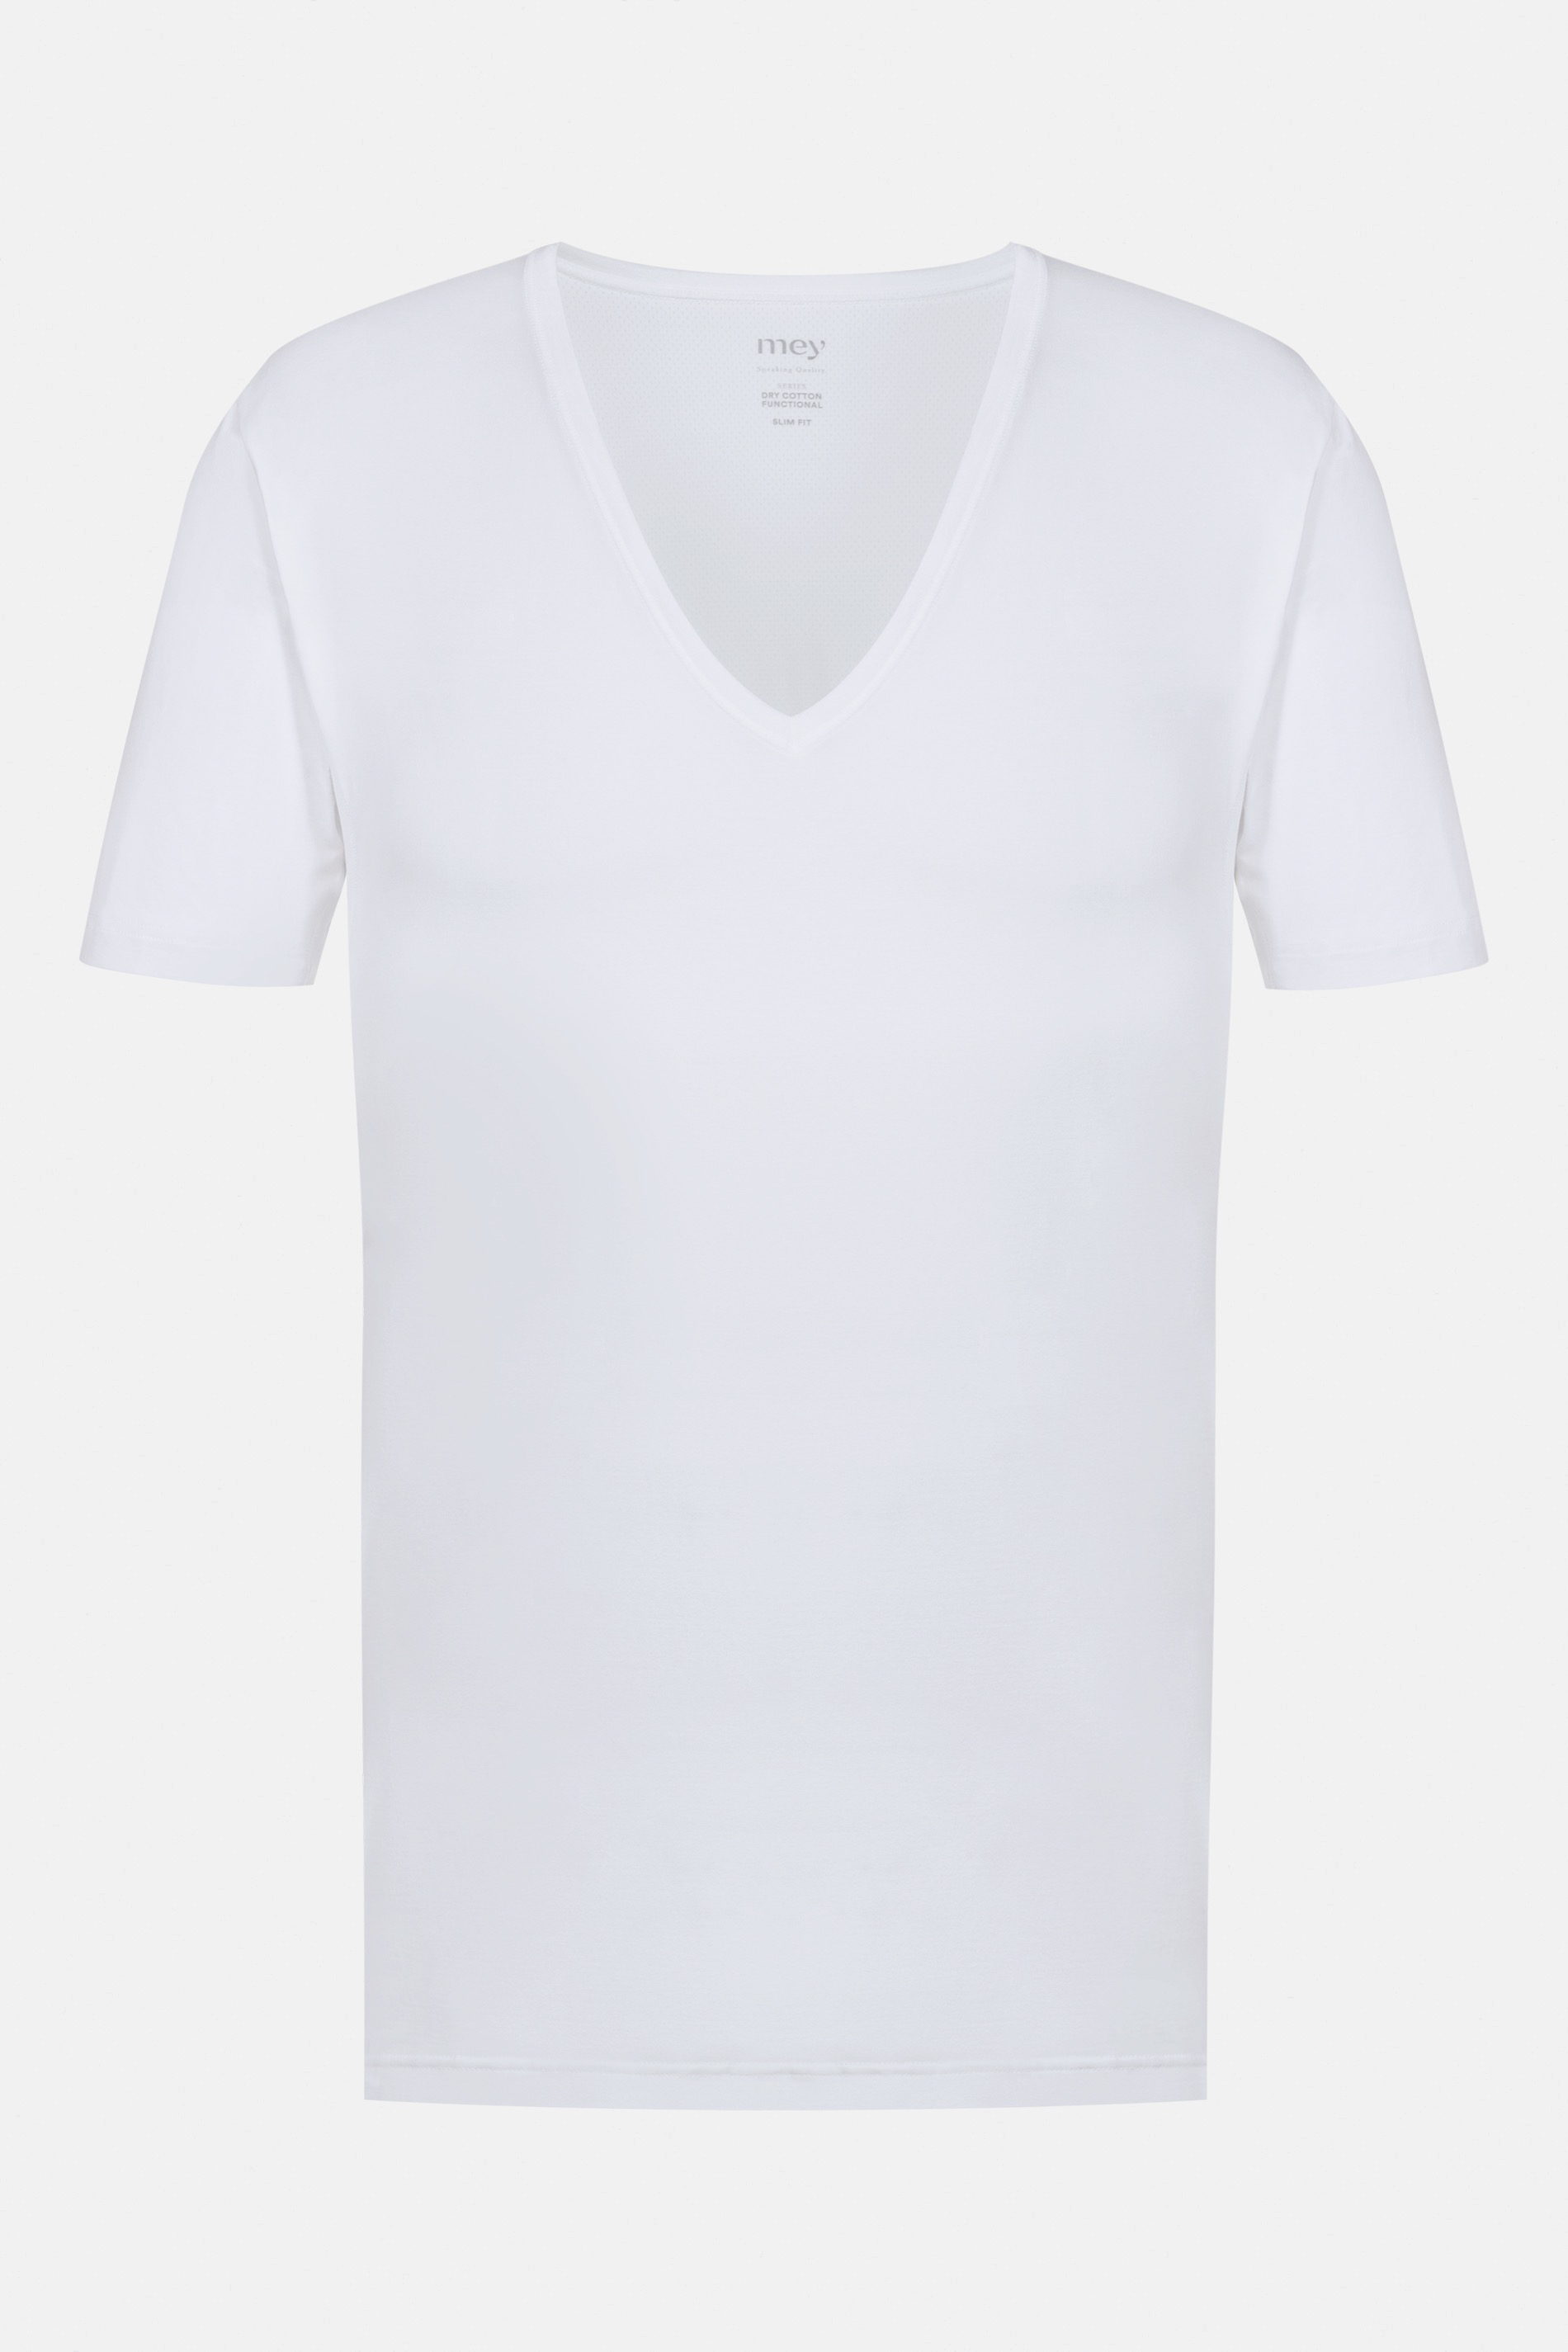 The undershirt - v neck | slim fit White Serie Dry Cotton Functional  Cut Out | mey®